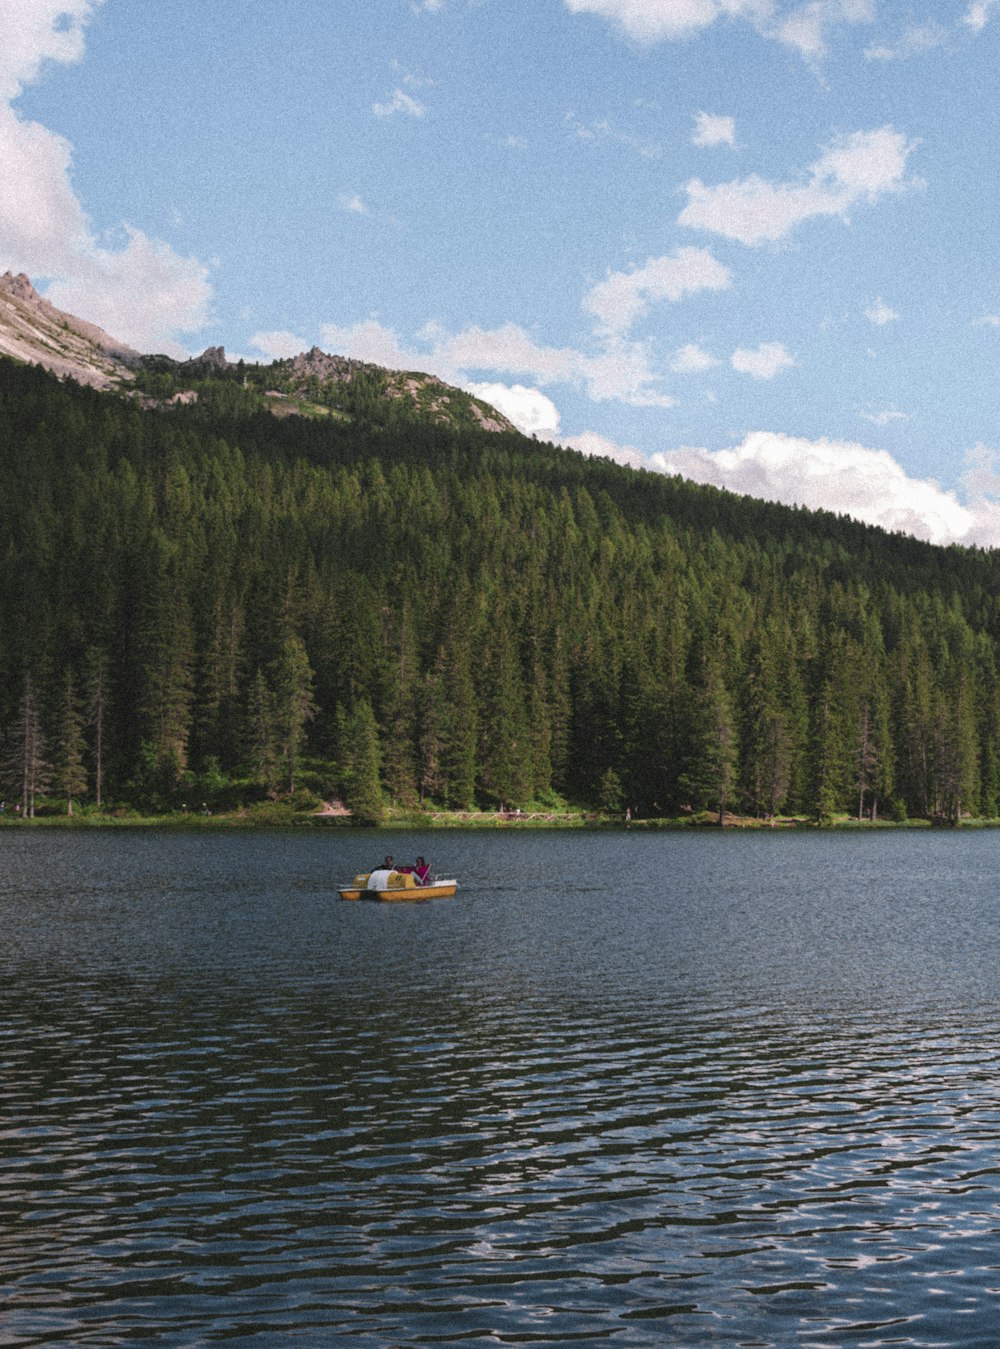 person riding on yellow kayak on lake near green trees and mountain during daytime